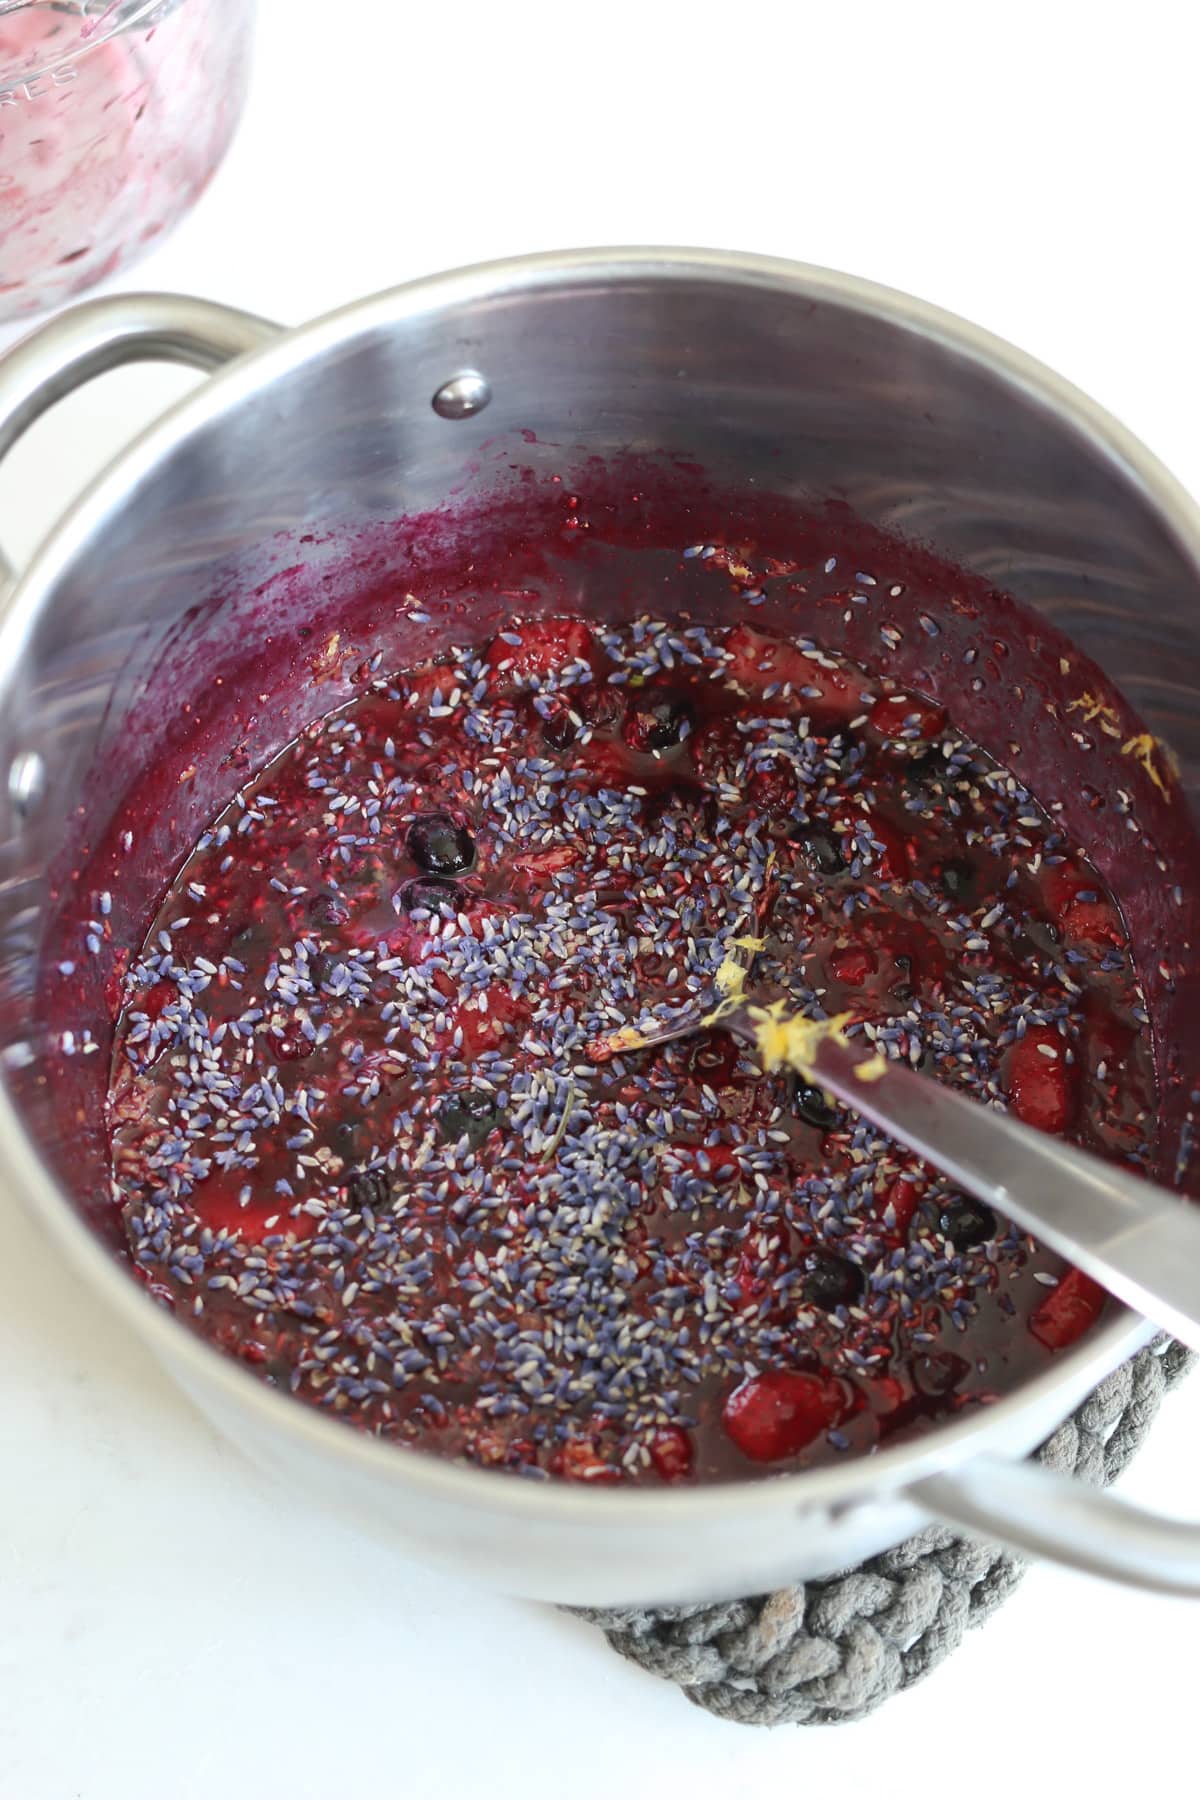 Cooked berries in a saucepan